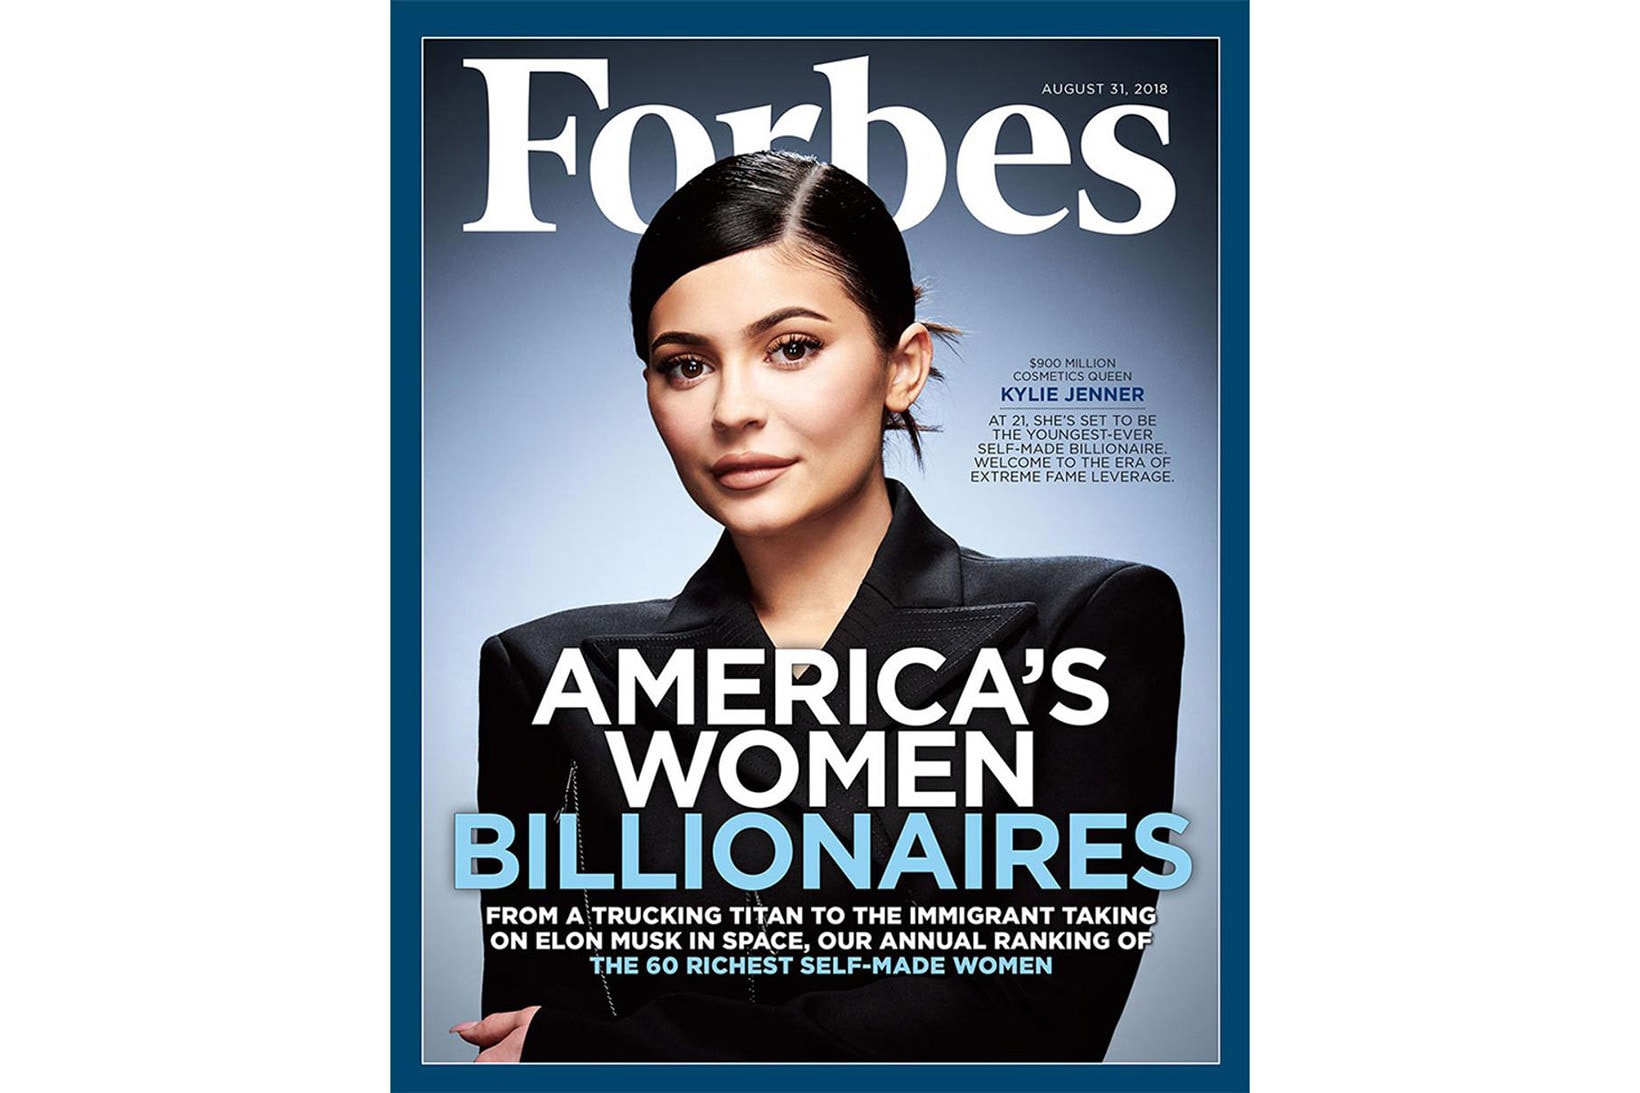 Kylie Jenner's Almost a Billionaire While on Forbes Digital Cover Jenners Kardashians